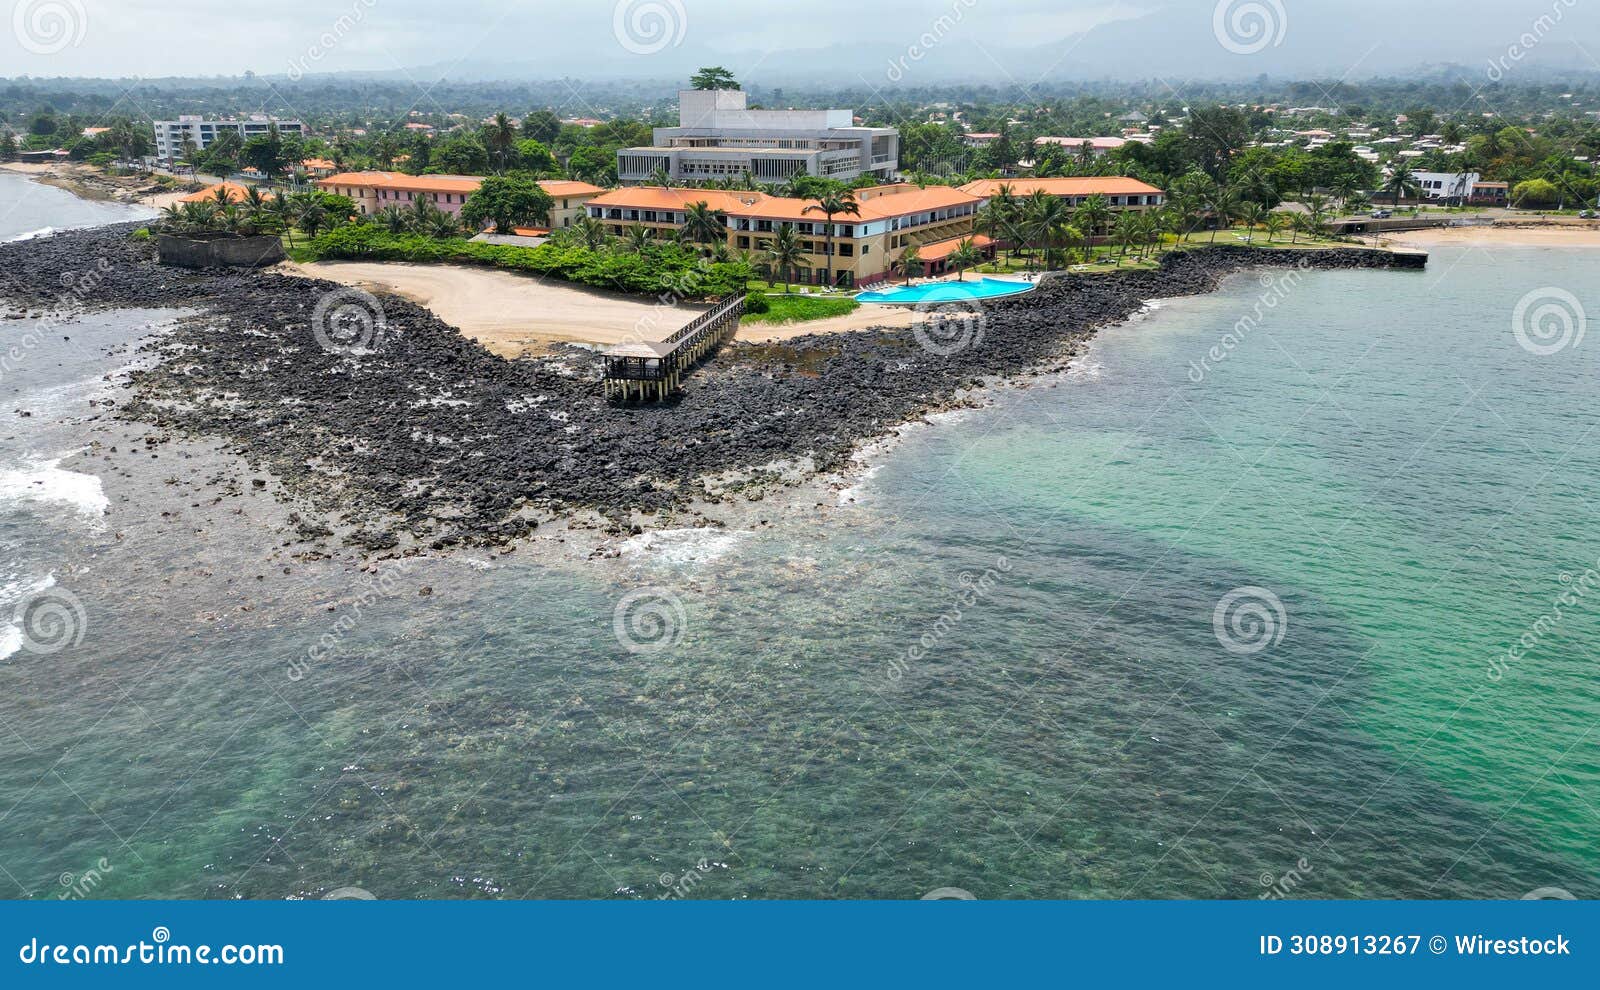 aerial view from  pestana hotel at sao tome, africa